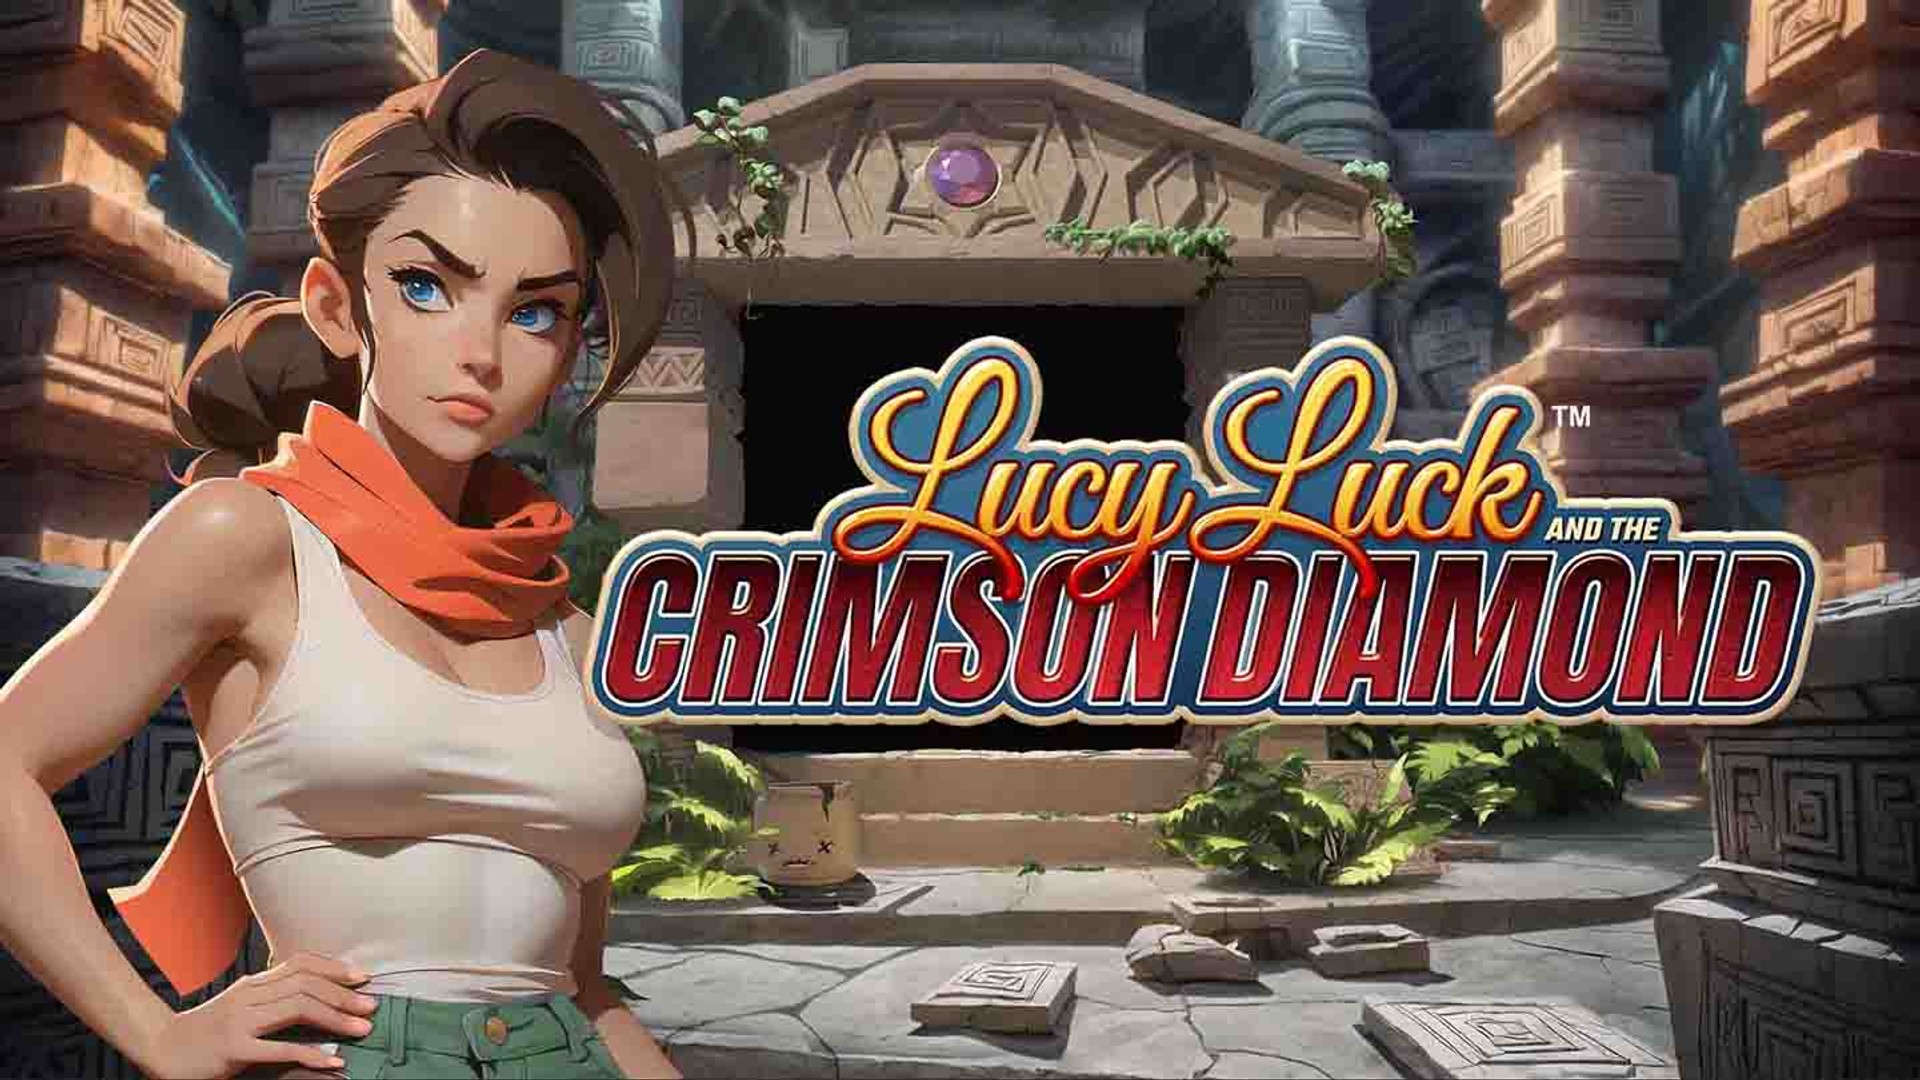 Lucy Luck and the Crimson Diamond